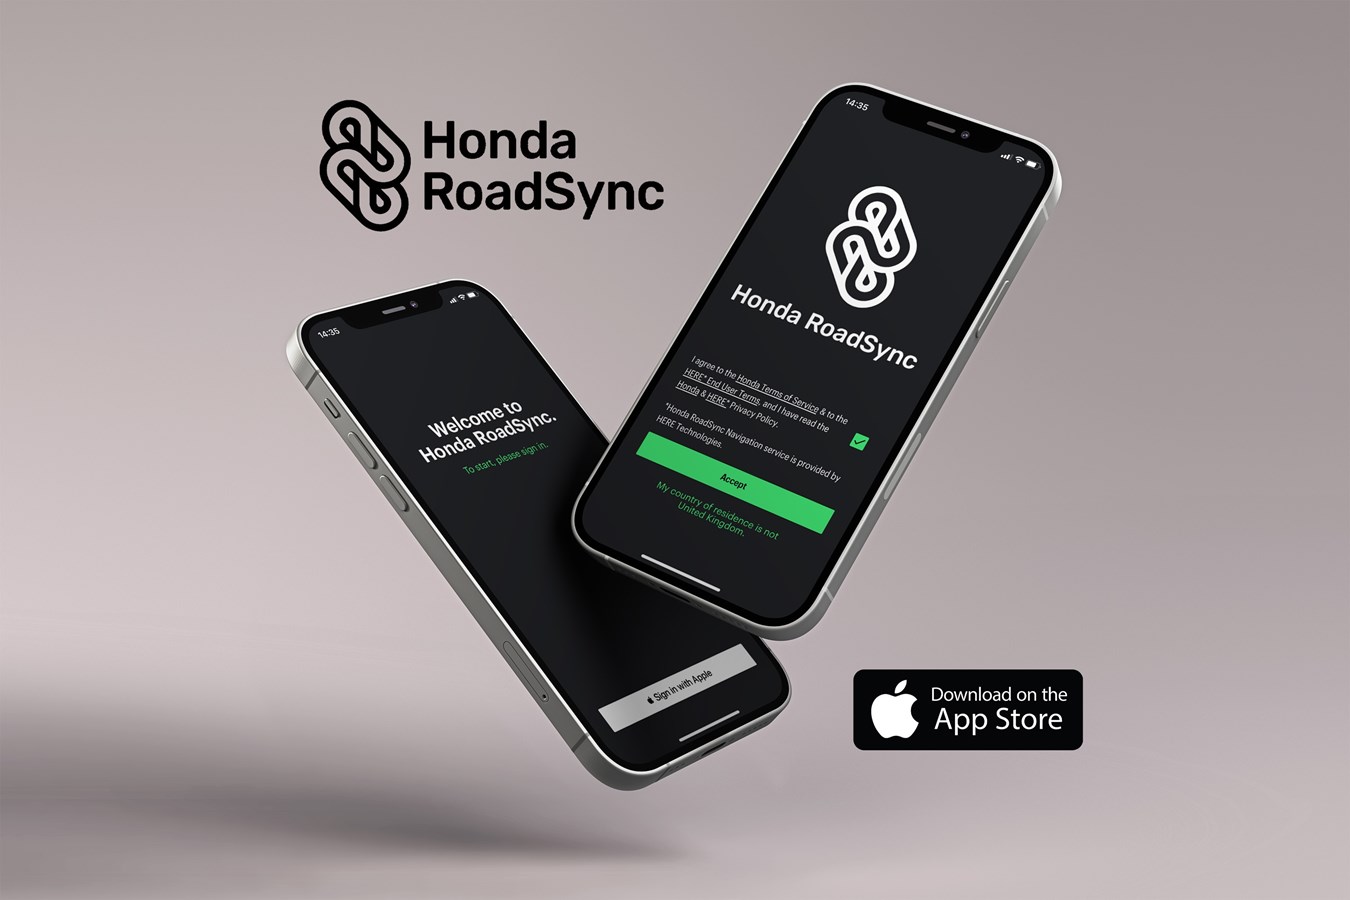 Honda Smartphone Voice Control system now available on iOS smartphones